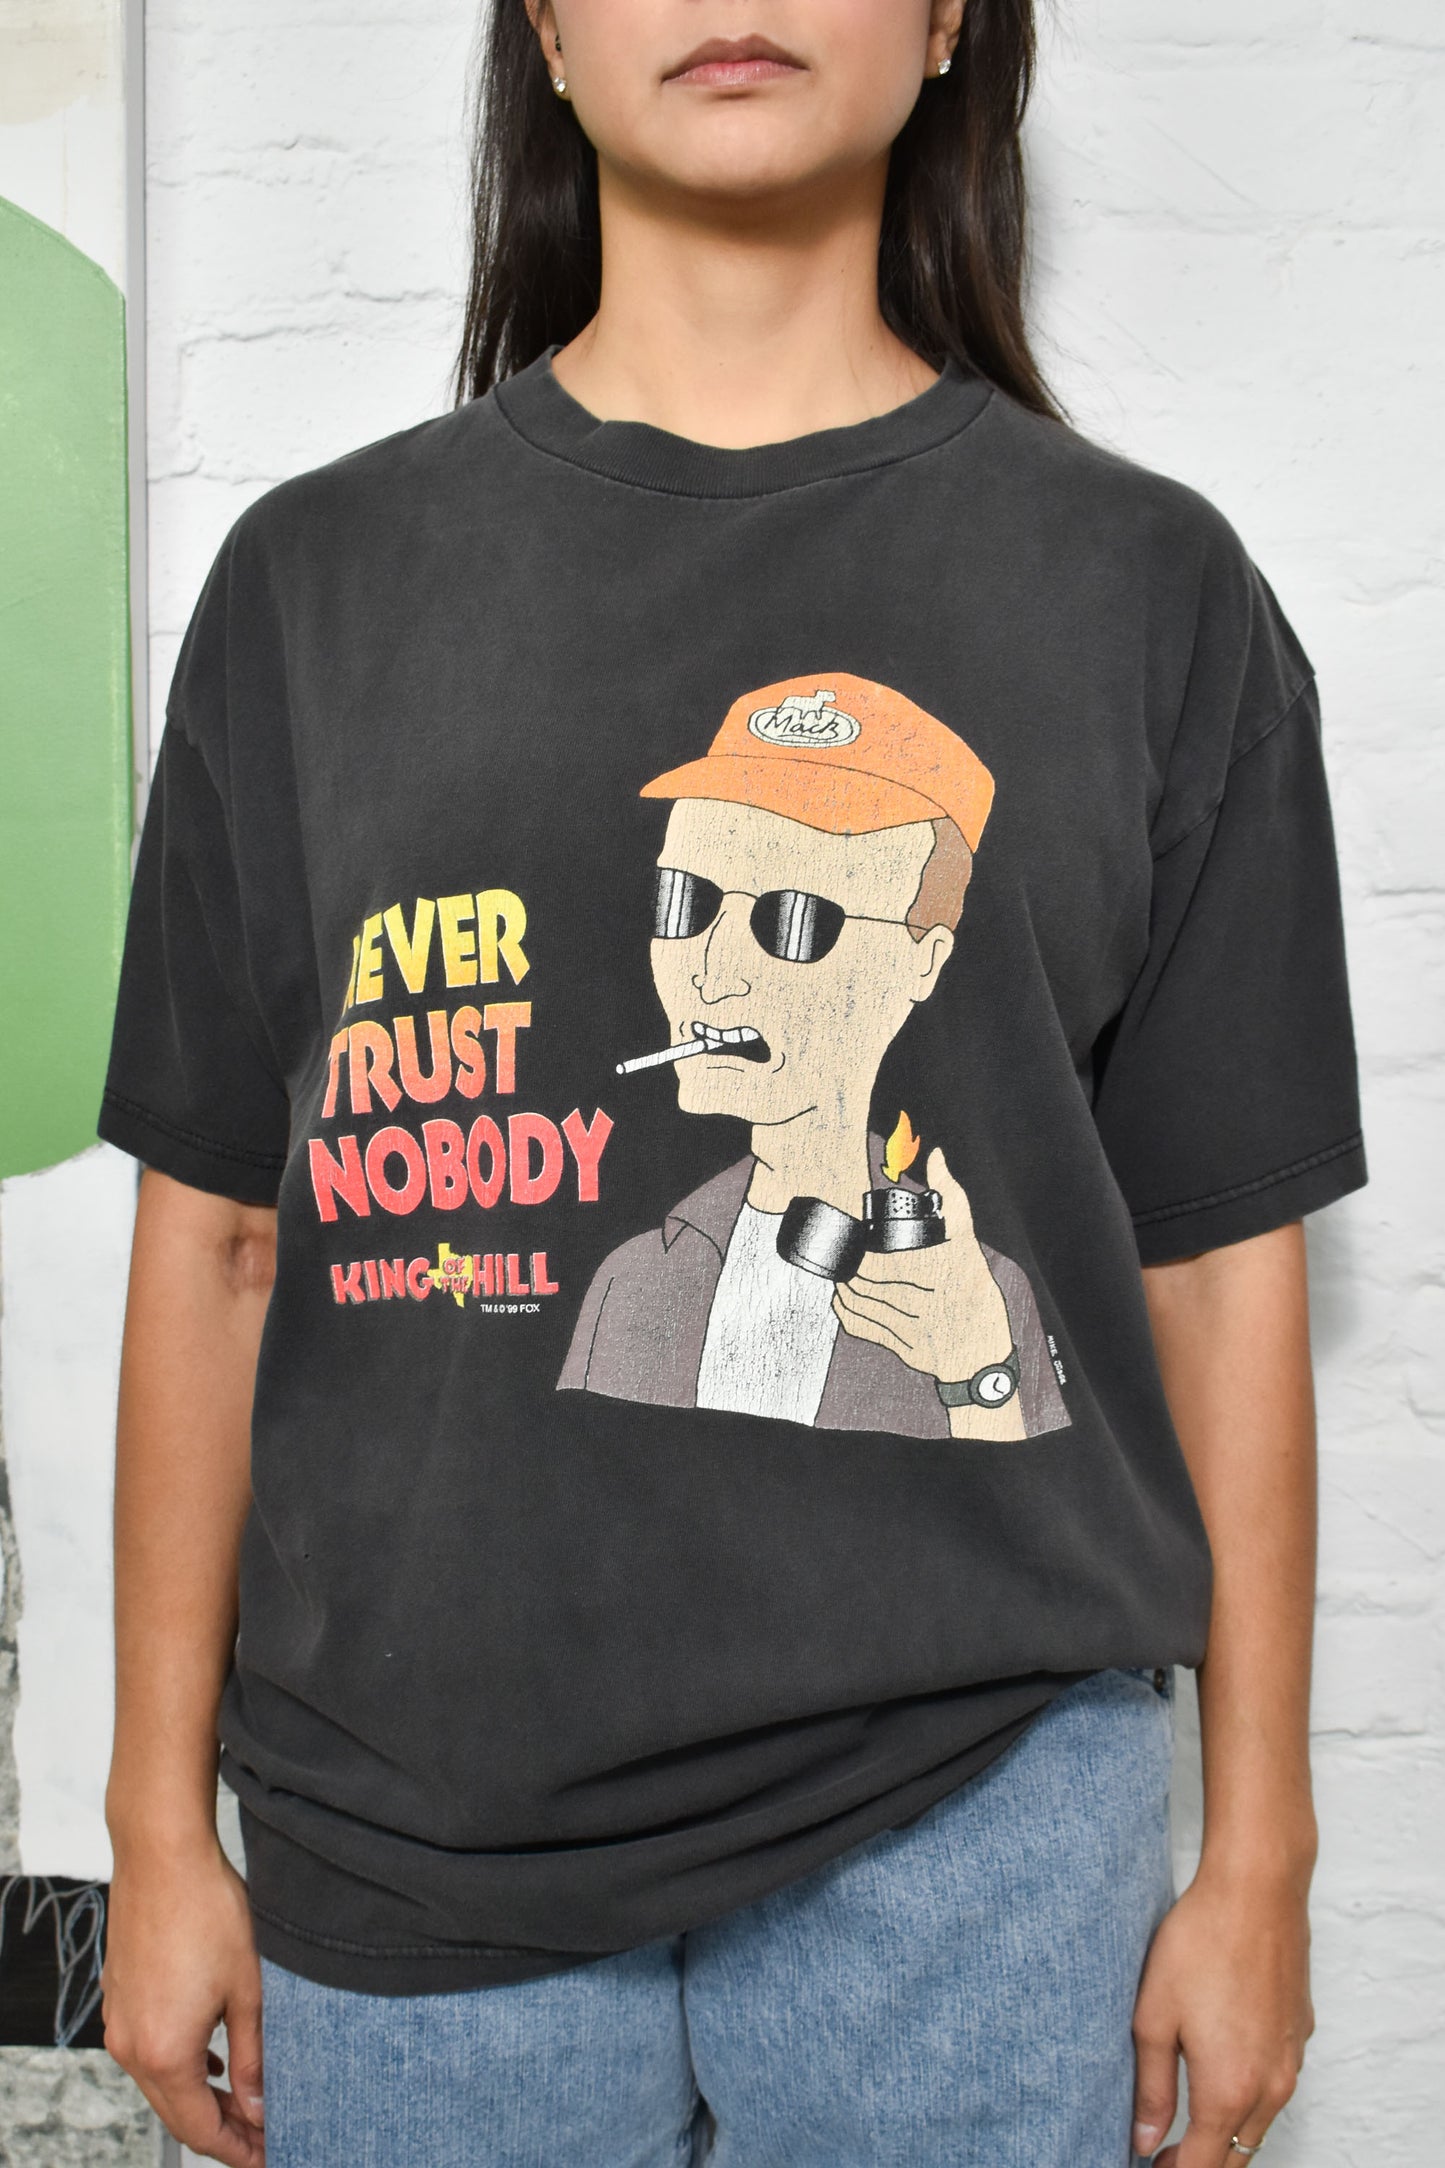 Vintage 1999 "Never Trust Nobody" King of the Hill T-Shirt